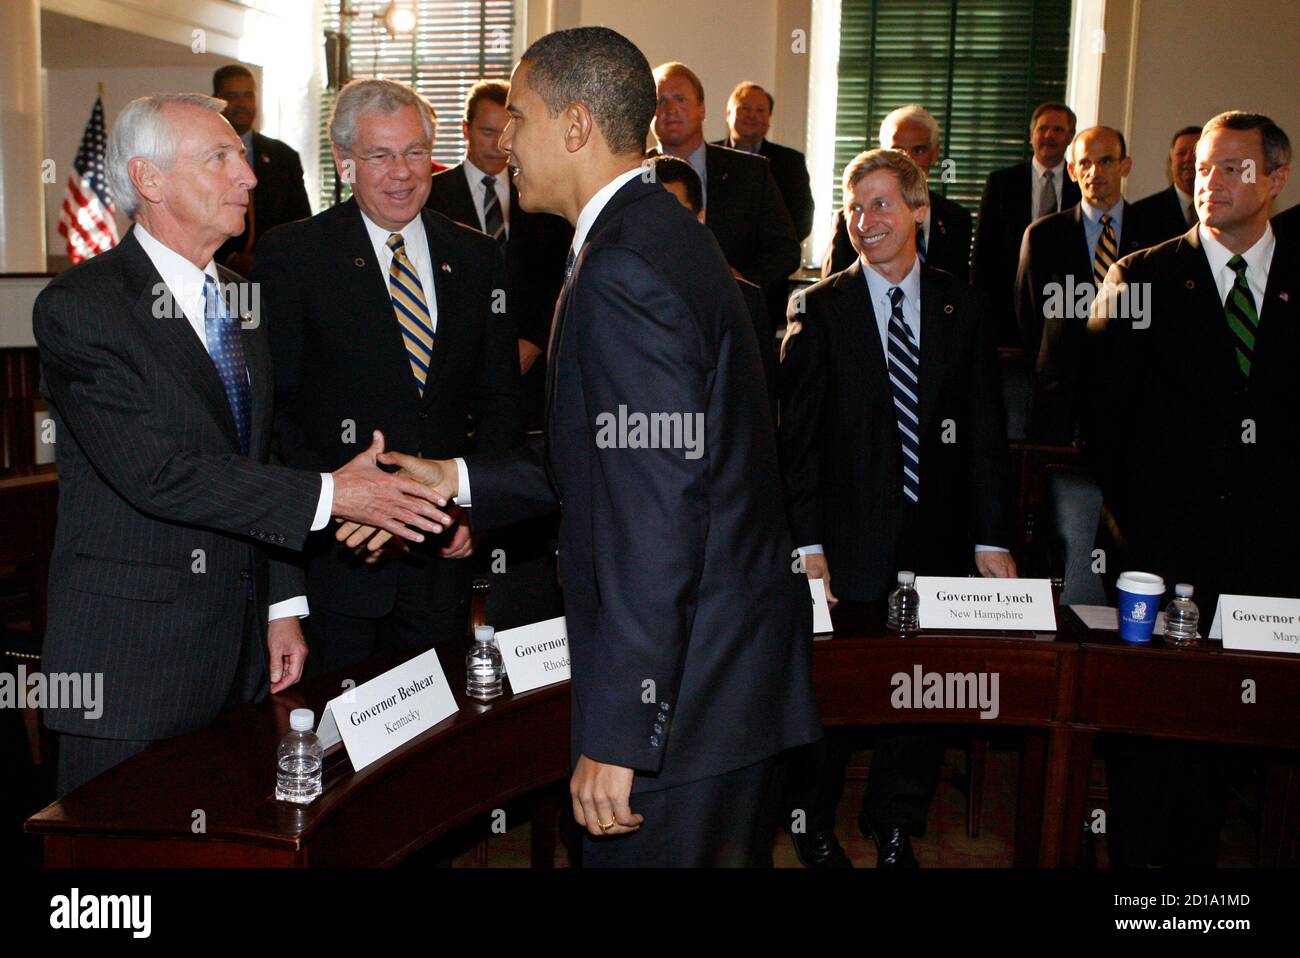 U.S. President-elect Barack Obama (R) shakes hands with Kentucky Governor Steve Beshear before a bipartisan meeting with members of the National Governors Association at Congress Hall in Independence Park in Philadelphia, Pennsylvania December 2, 2008. REUTERS/Jeff Haynes (UNITED STATES) Stock Photo